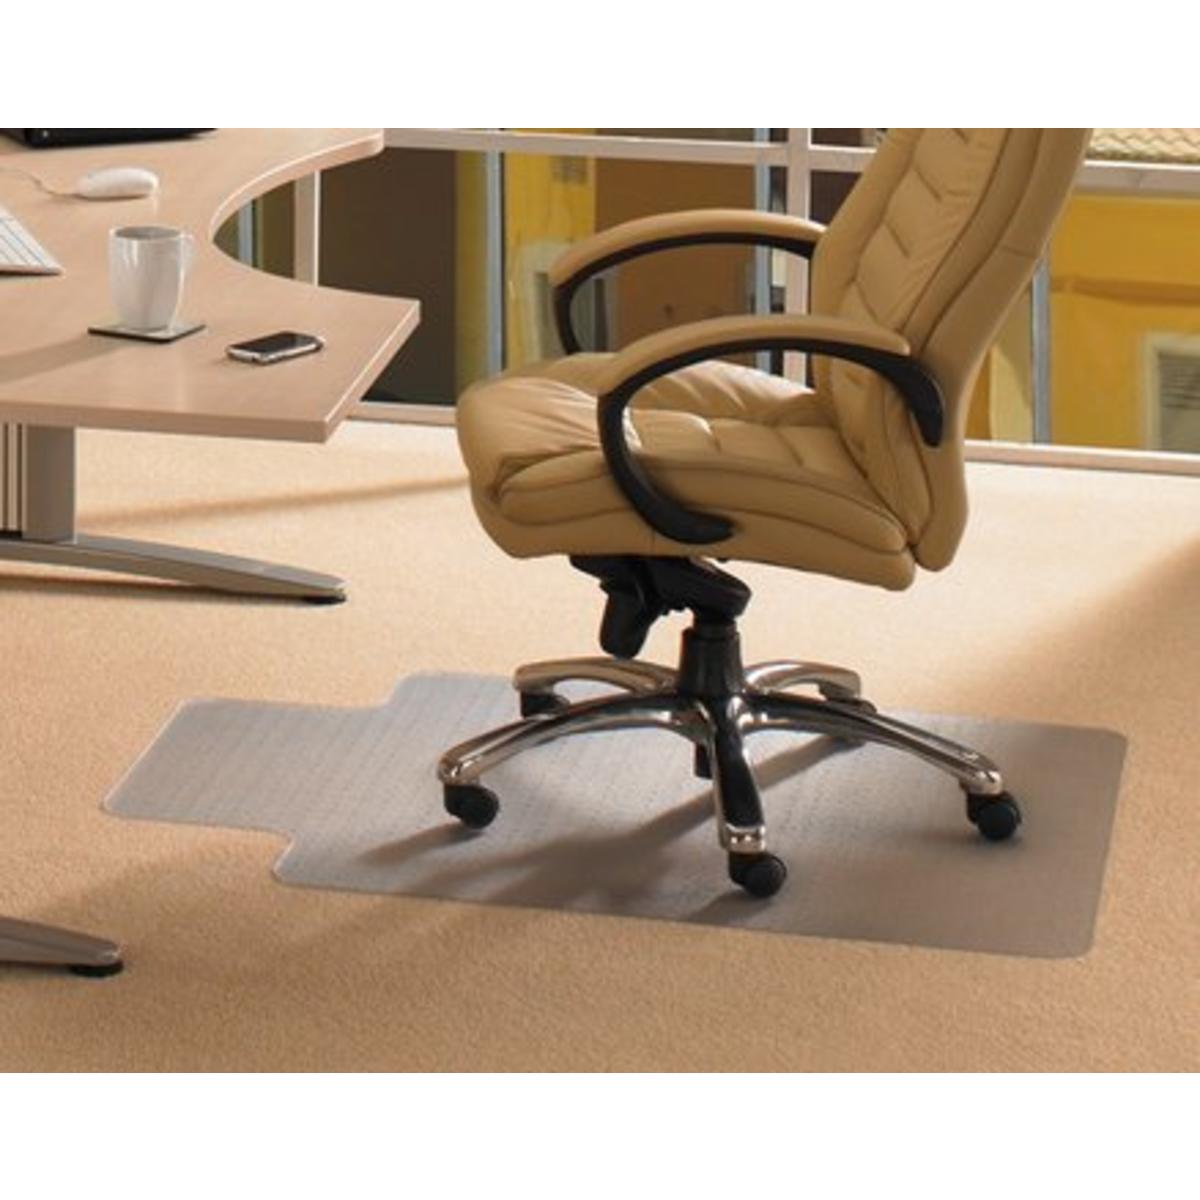 Picture of Floortex Cleartex 119225LV Advantagemat Pvc Rectangular Lipped Chair Mat For Low Pile Carpets 0.25 In.- Clear 36 X 48 In.- Chair not included